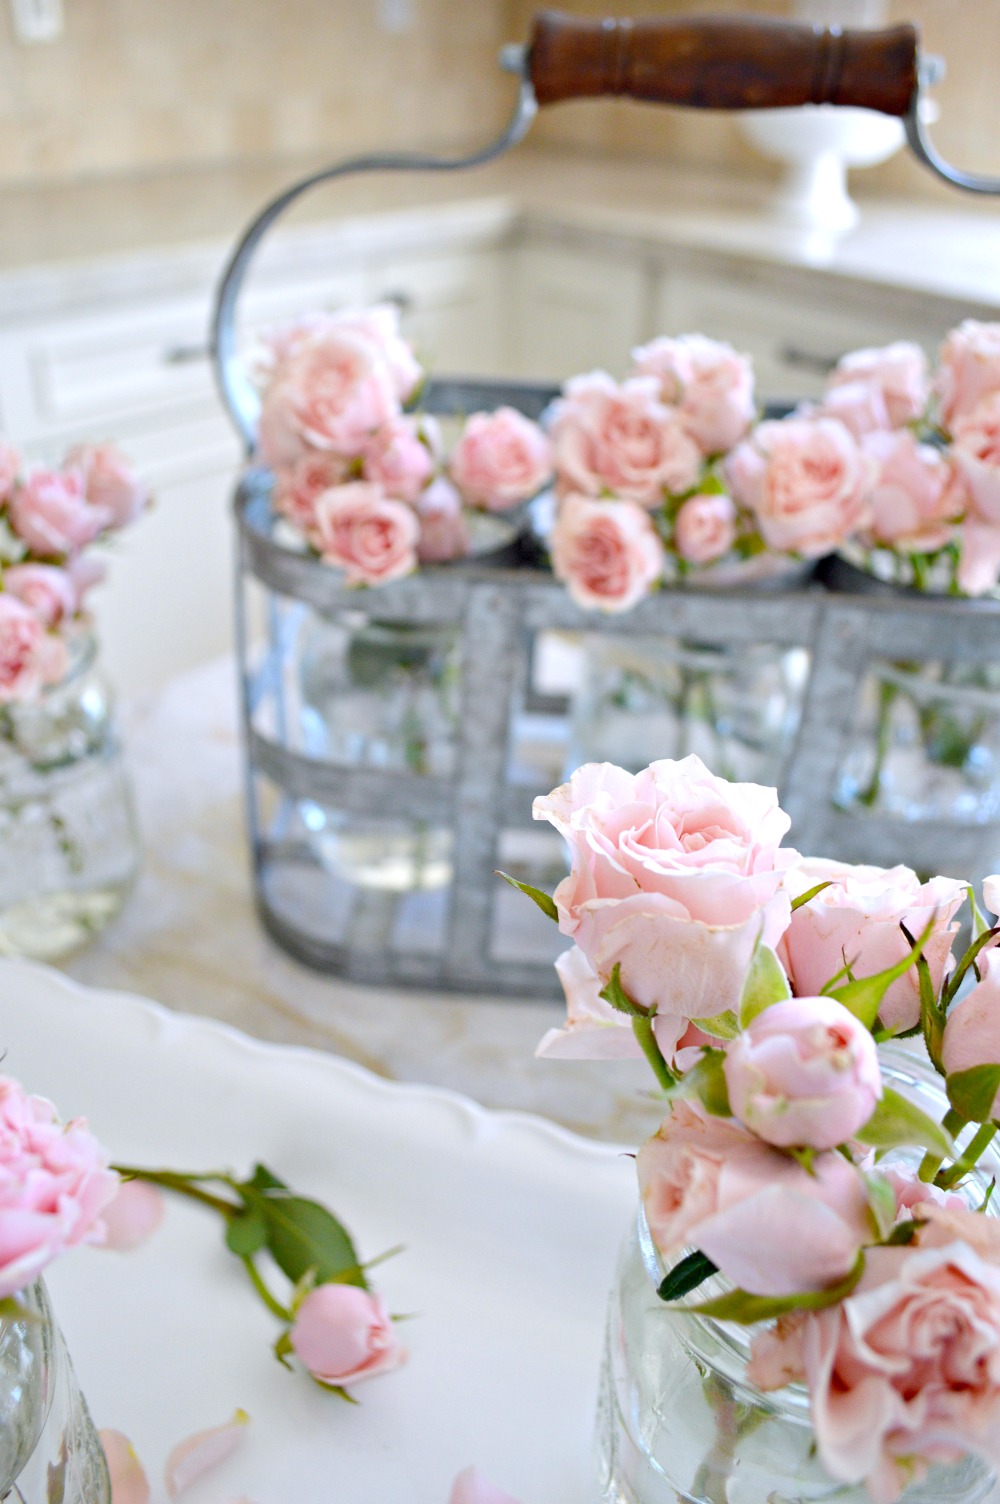 delicate roses displayed in a vintage caddy, so pretty